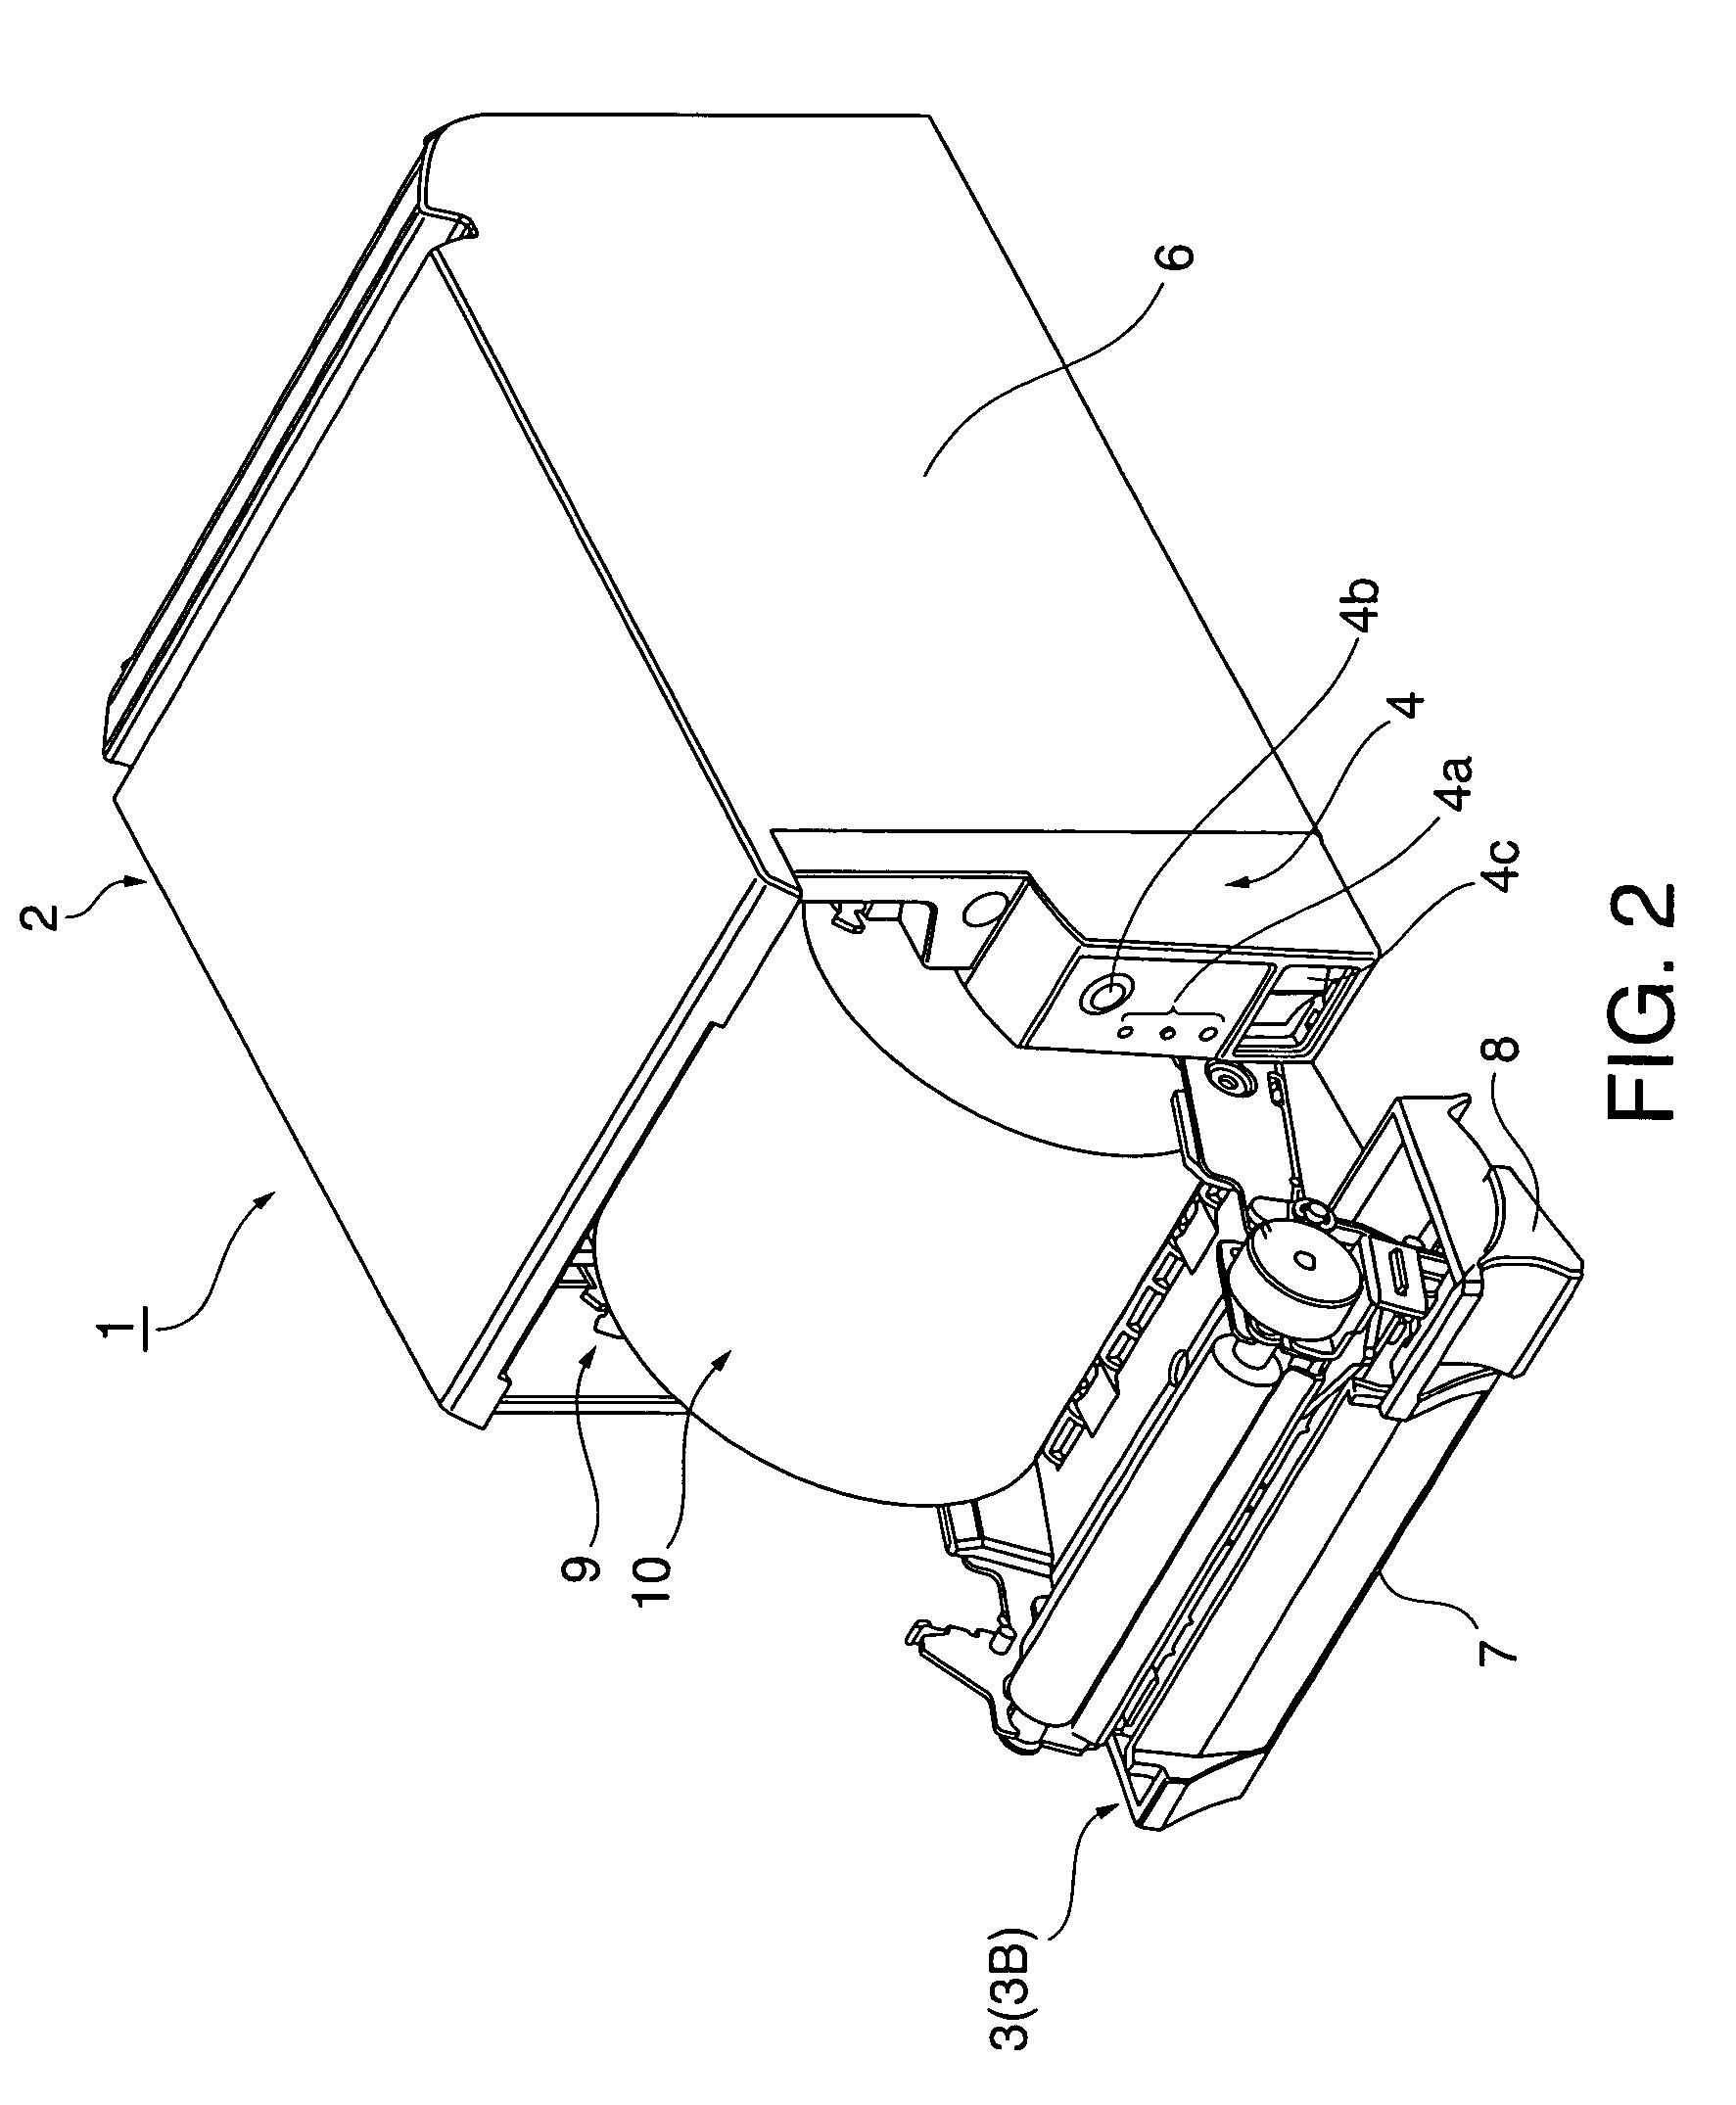 Paper cutting device and printer